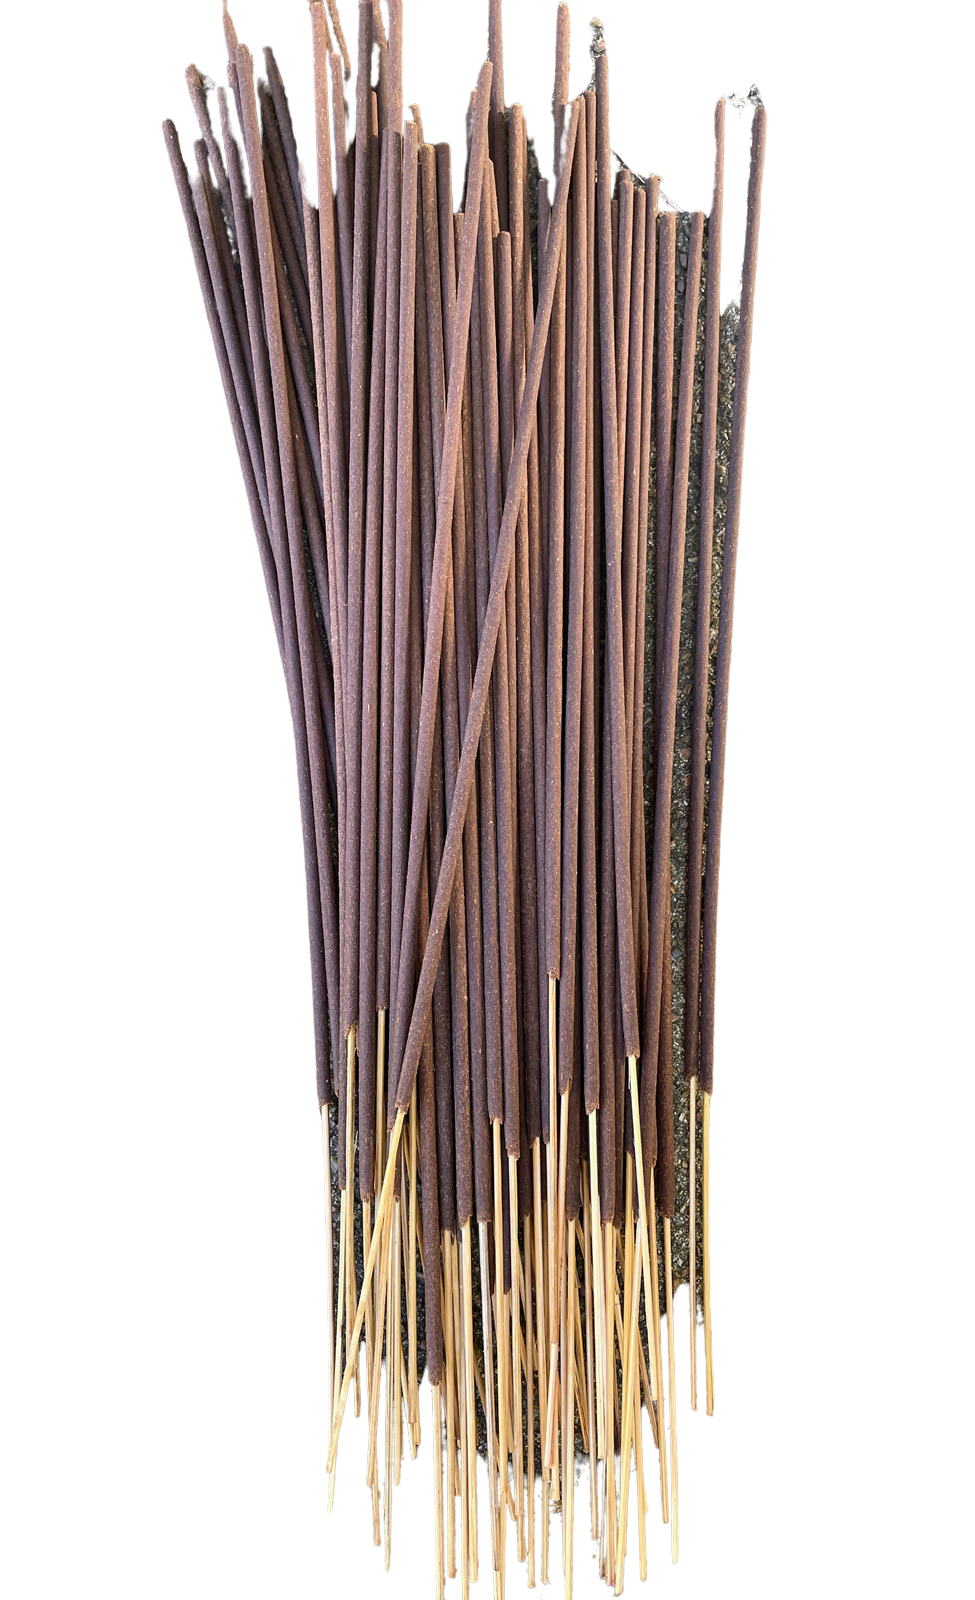 Lit Life Creations - BELOVED 11-inch incense stick for meditation & aromatherapy